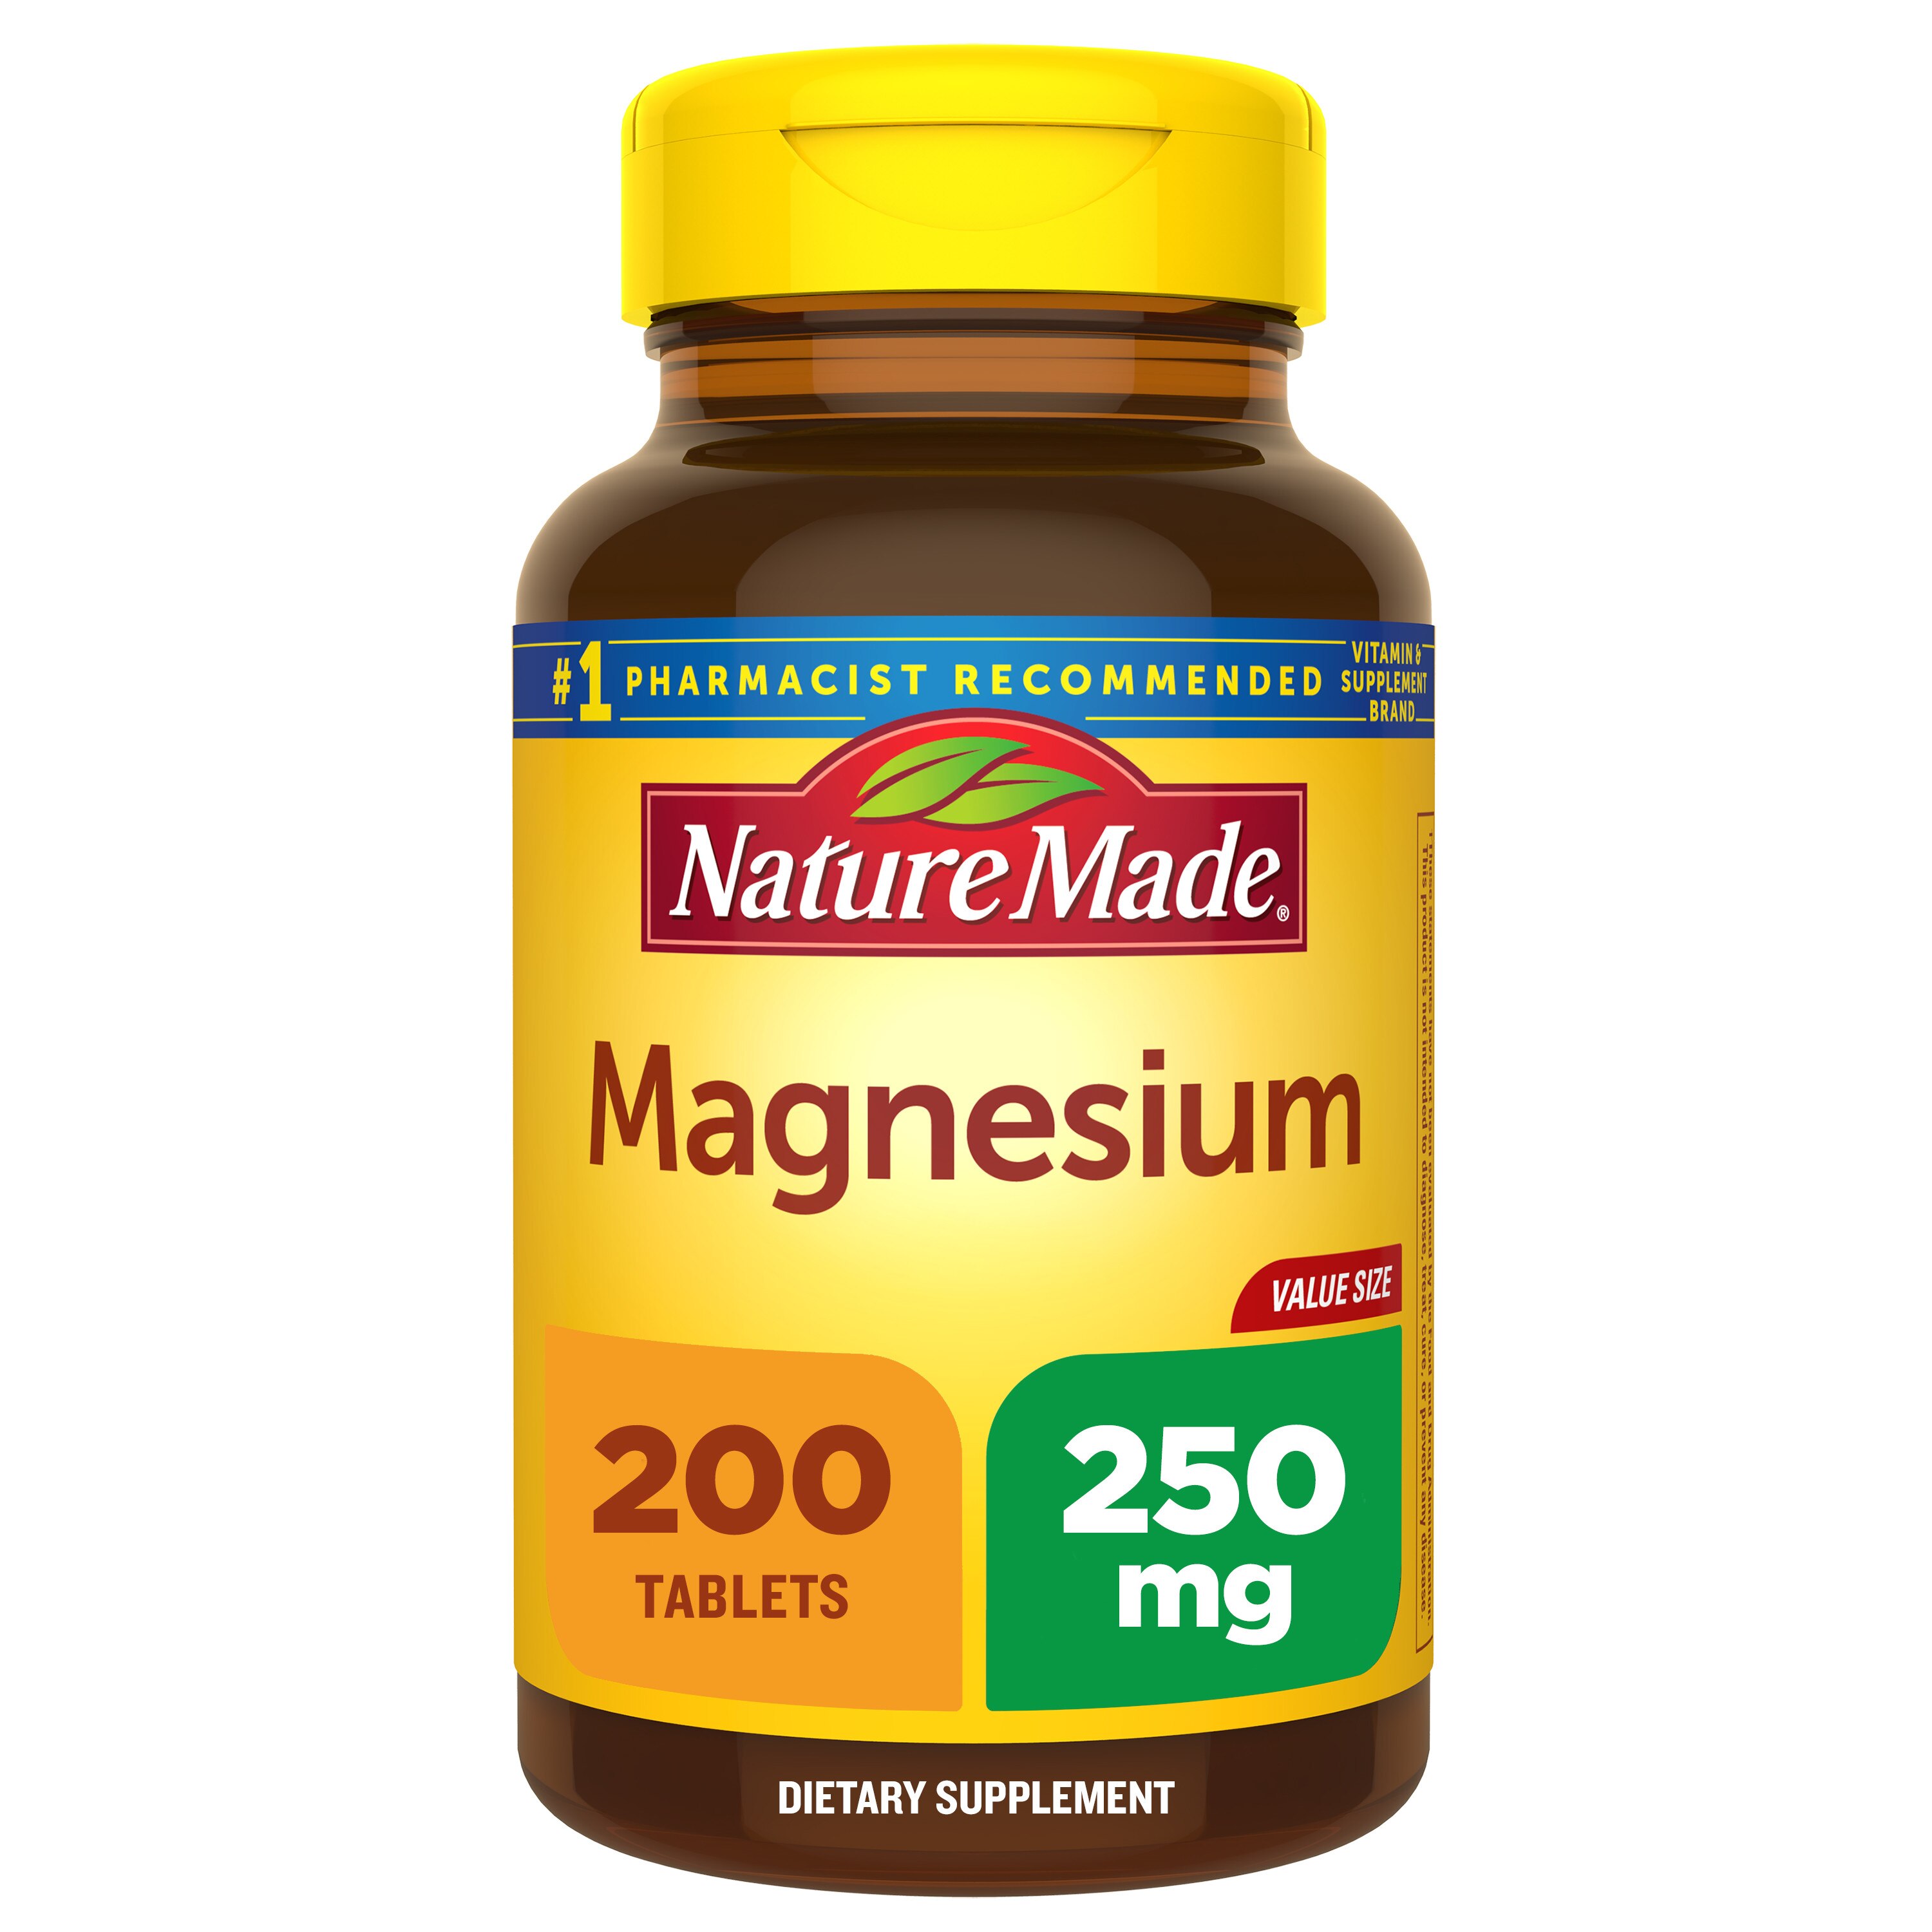 Nature Made Magnesium (Oxide) 250 mg Tablets Value Size, 200CT